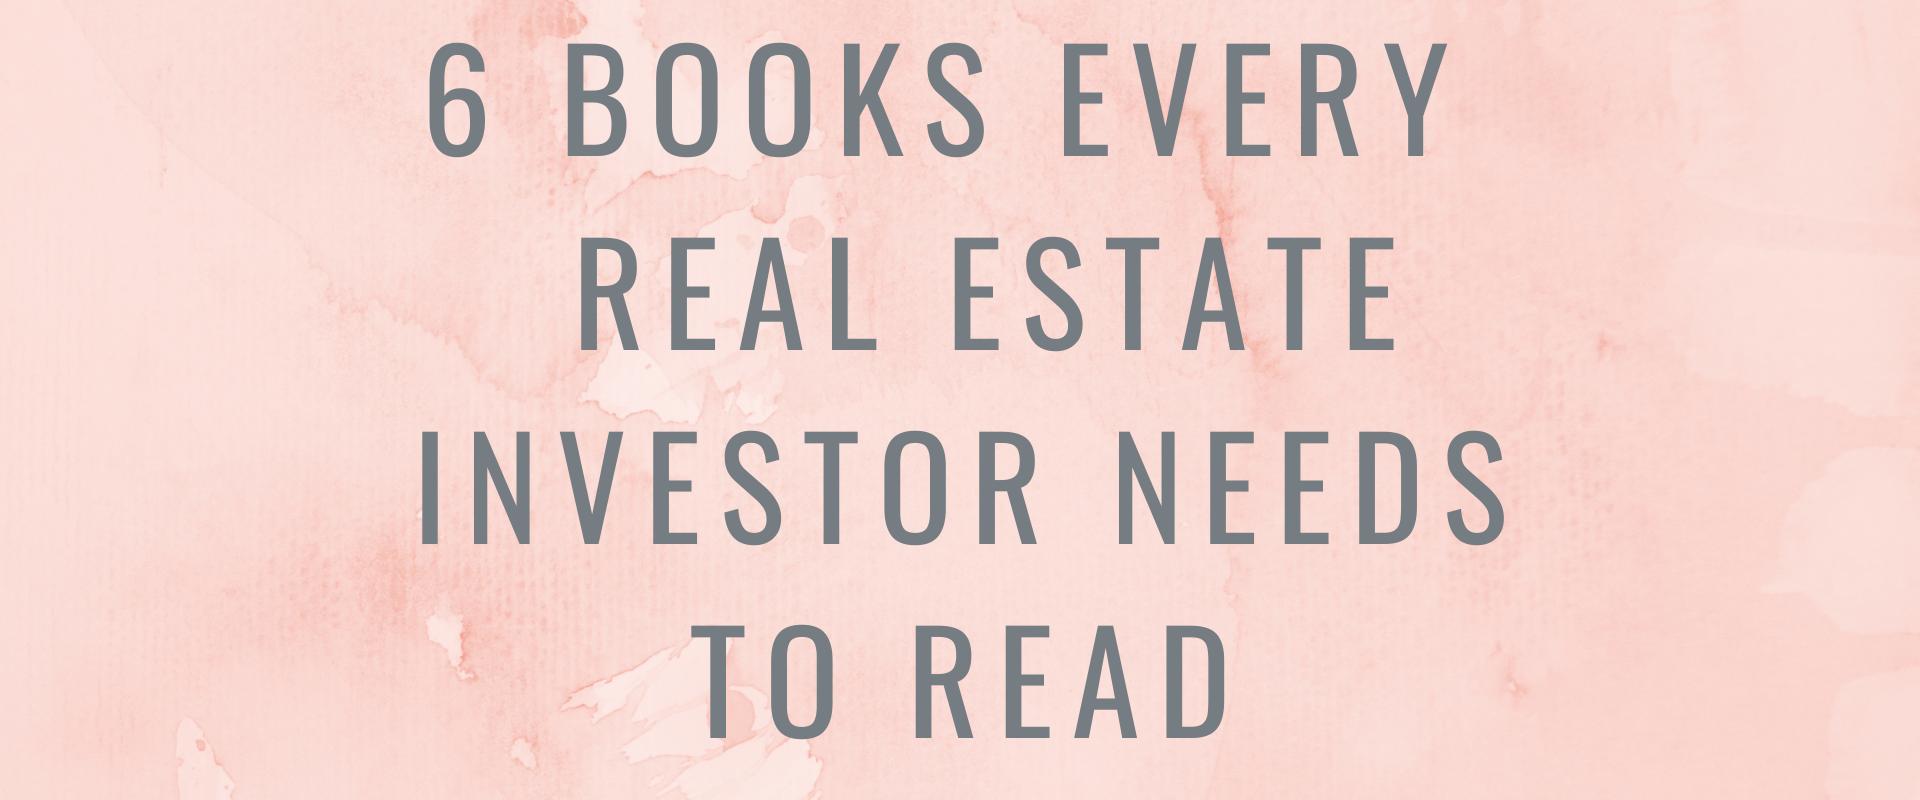 6 Books Every Real Estate Investor Needs To Read